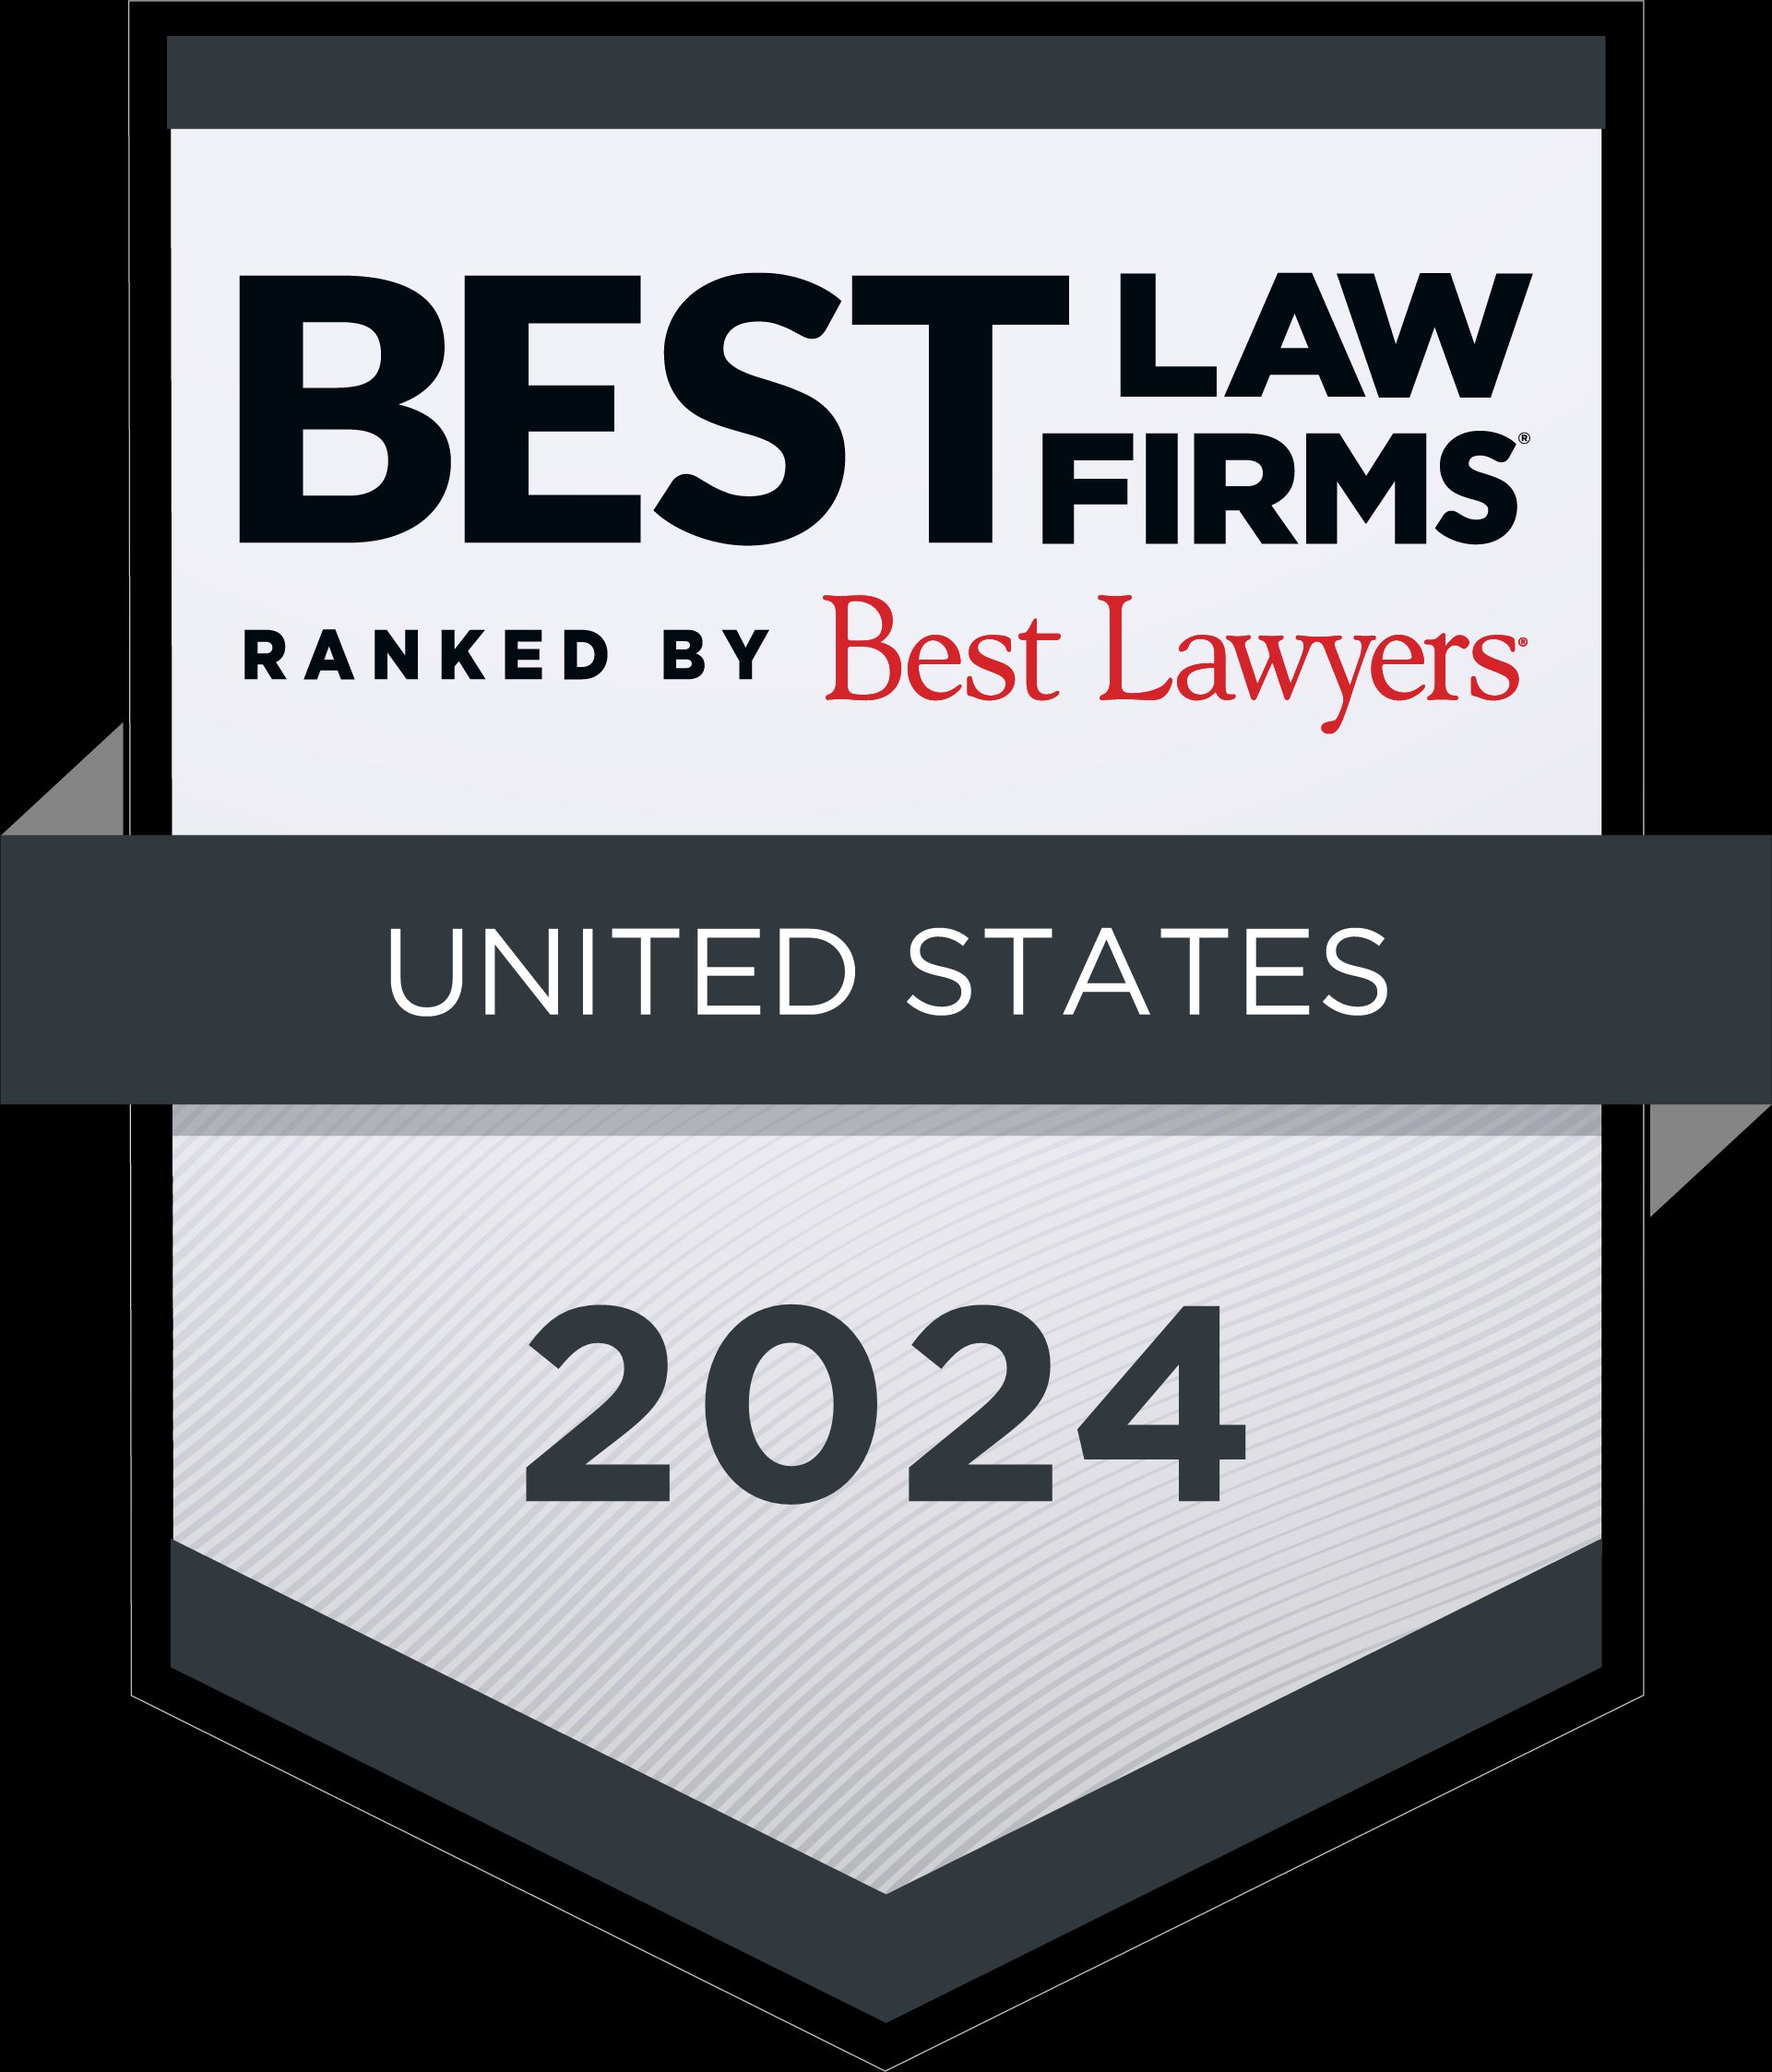 Chamberlain Hrdlicka Best Lawyers® "Best Law Firms" in 2024 Edition